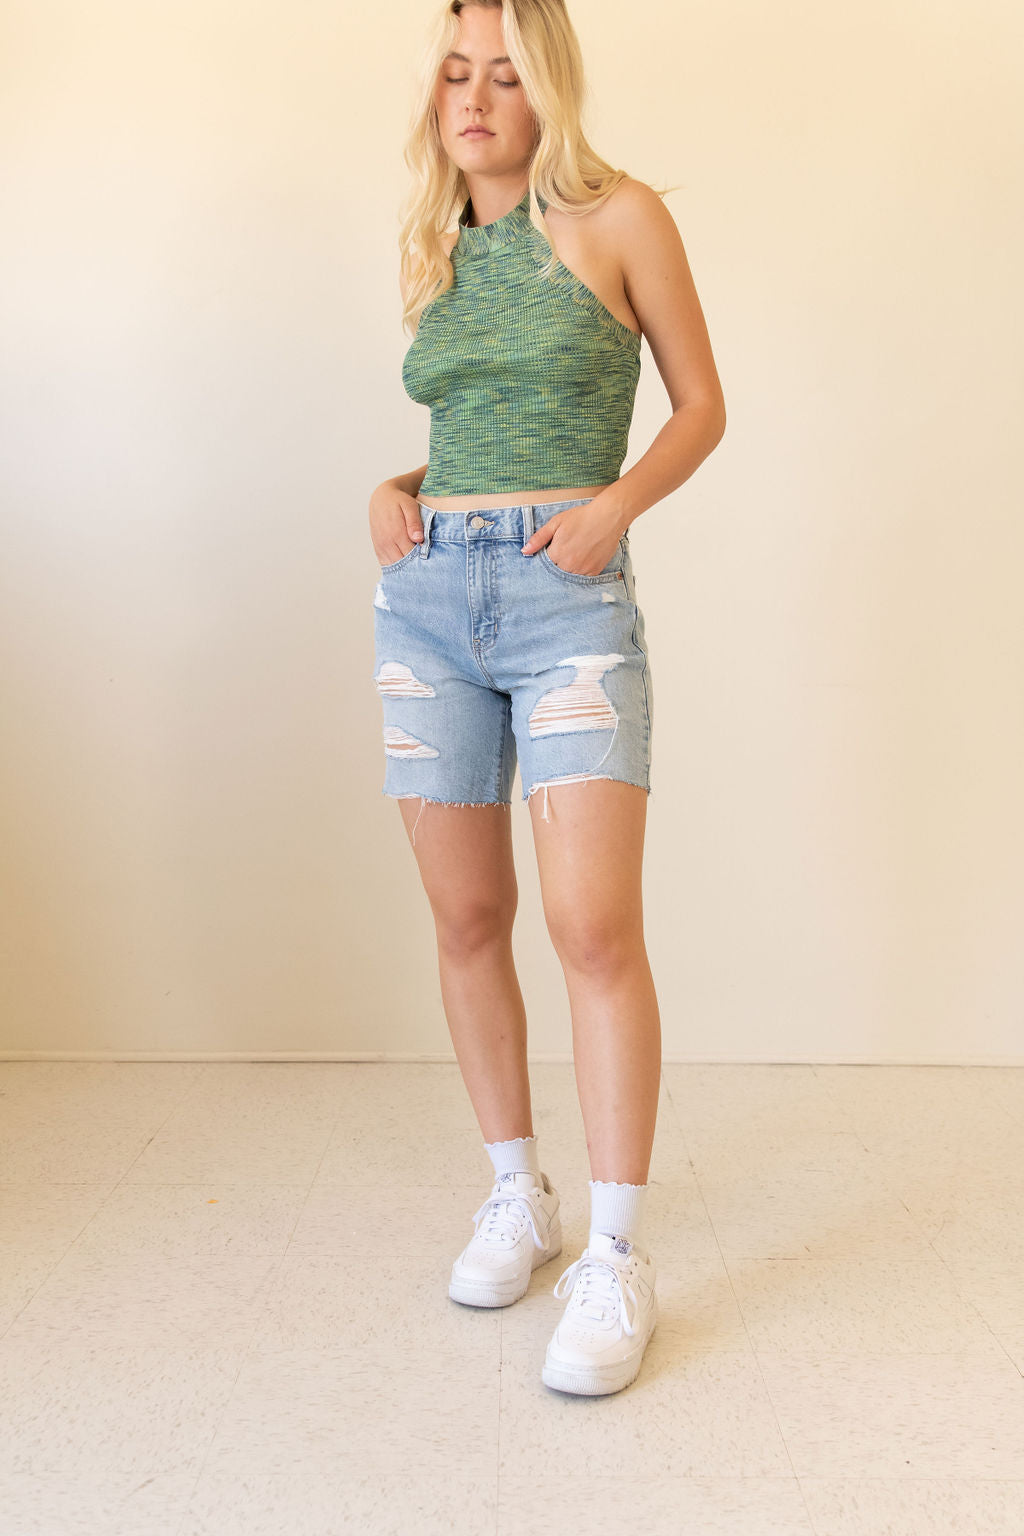 Distressed Mid Thigh Shorts, Inspired Wings Fashion